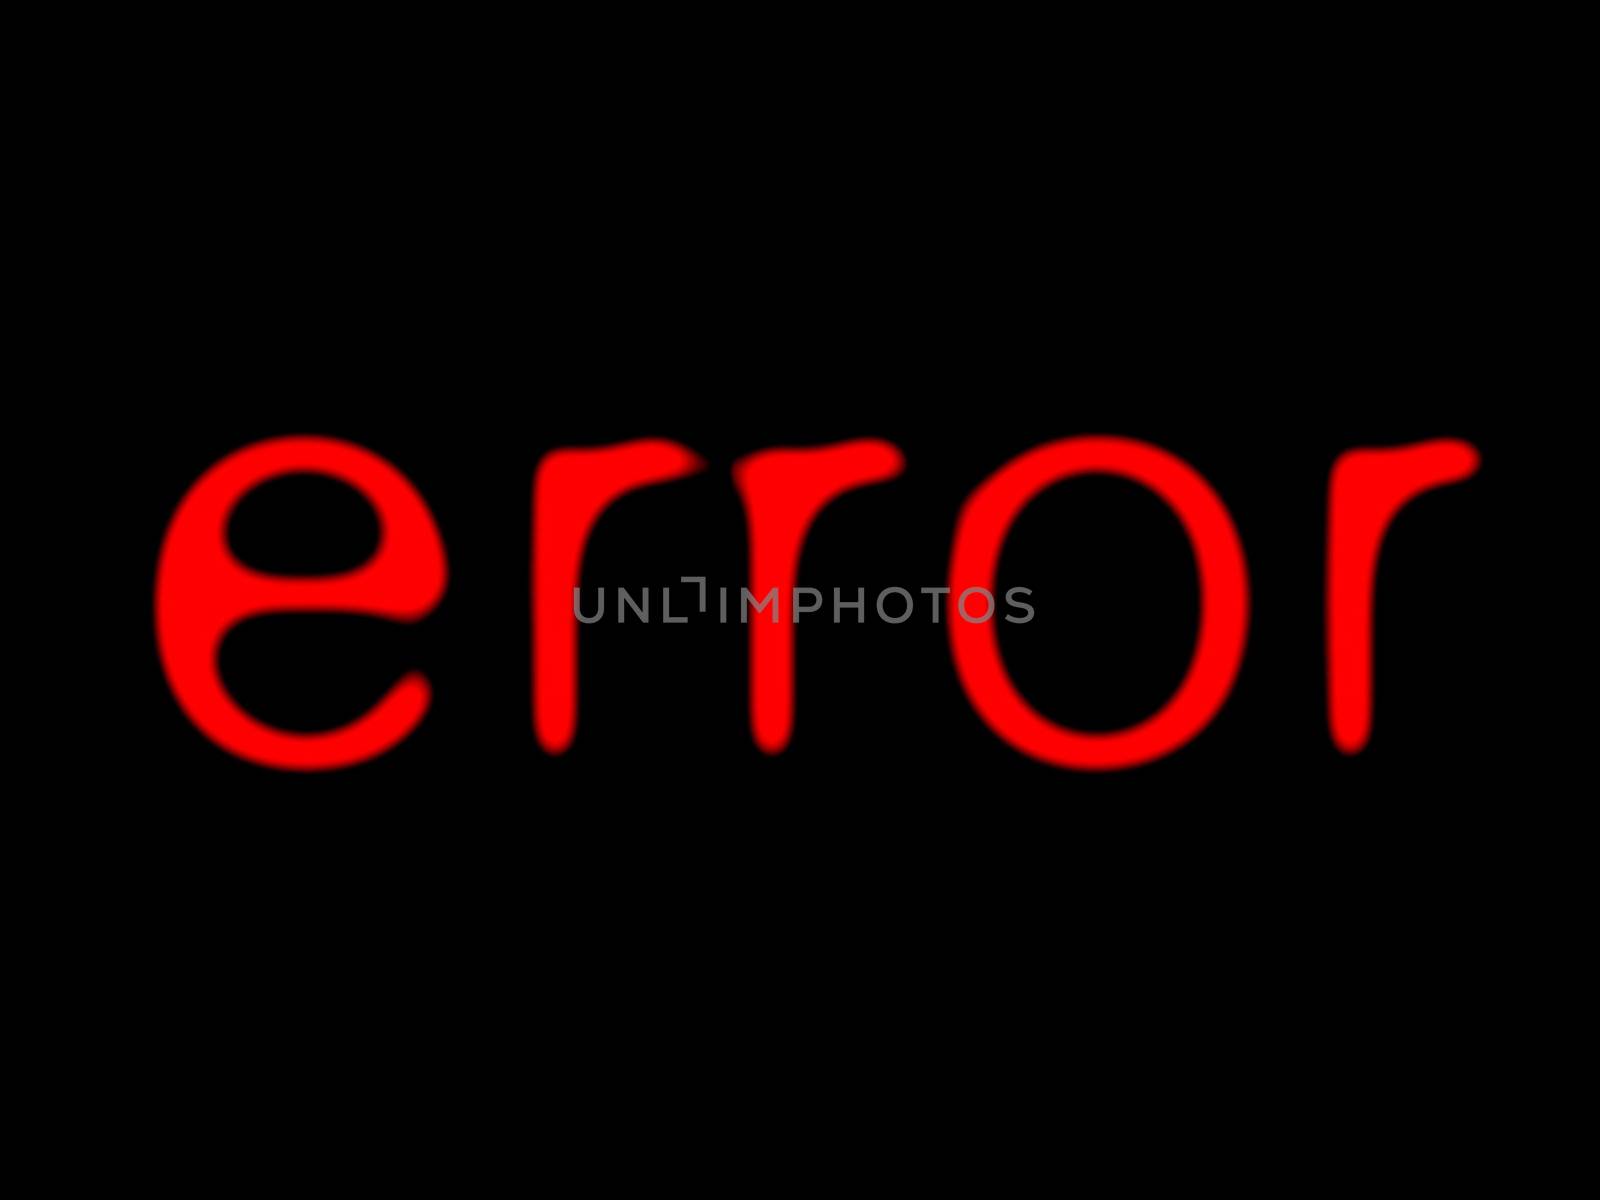 abstract unfocused red error message against black background